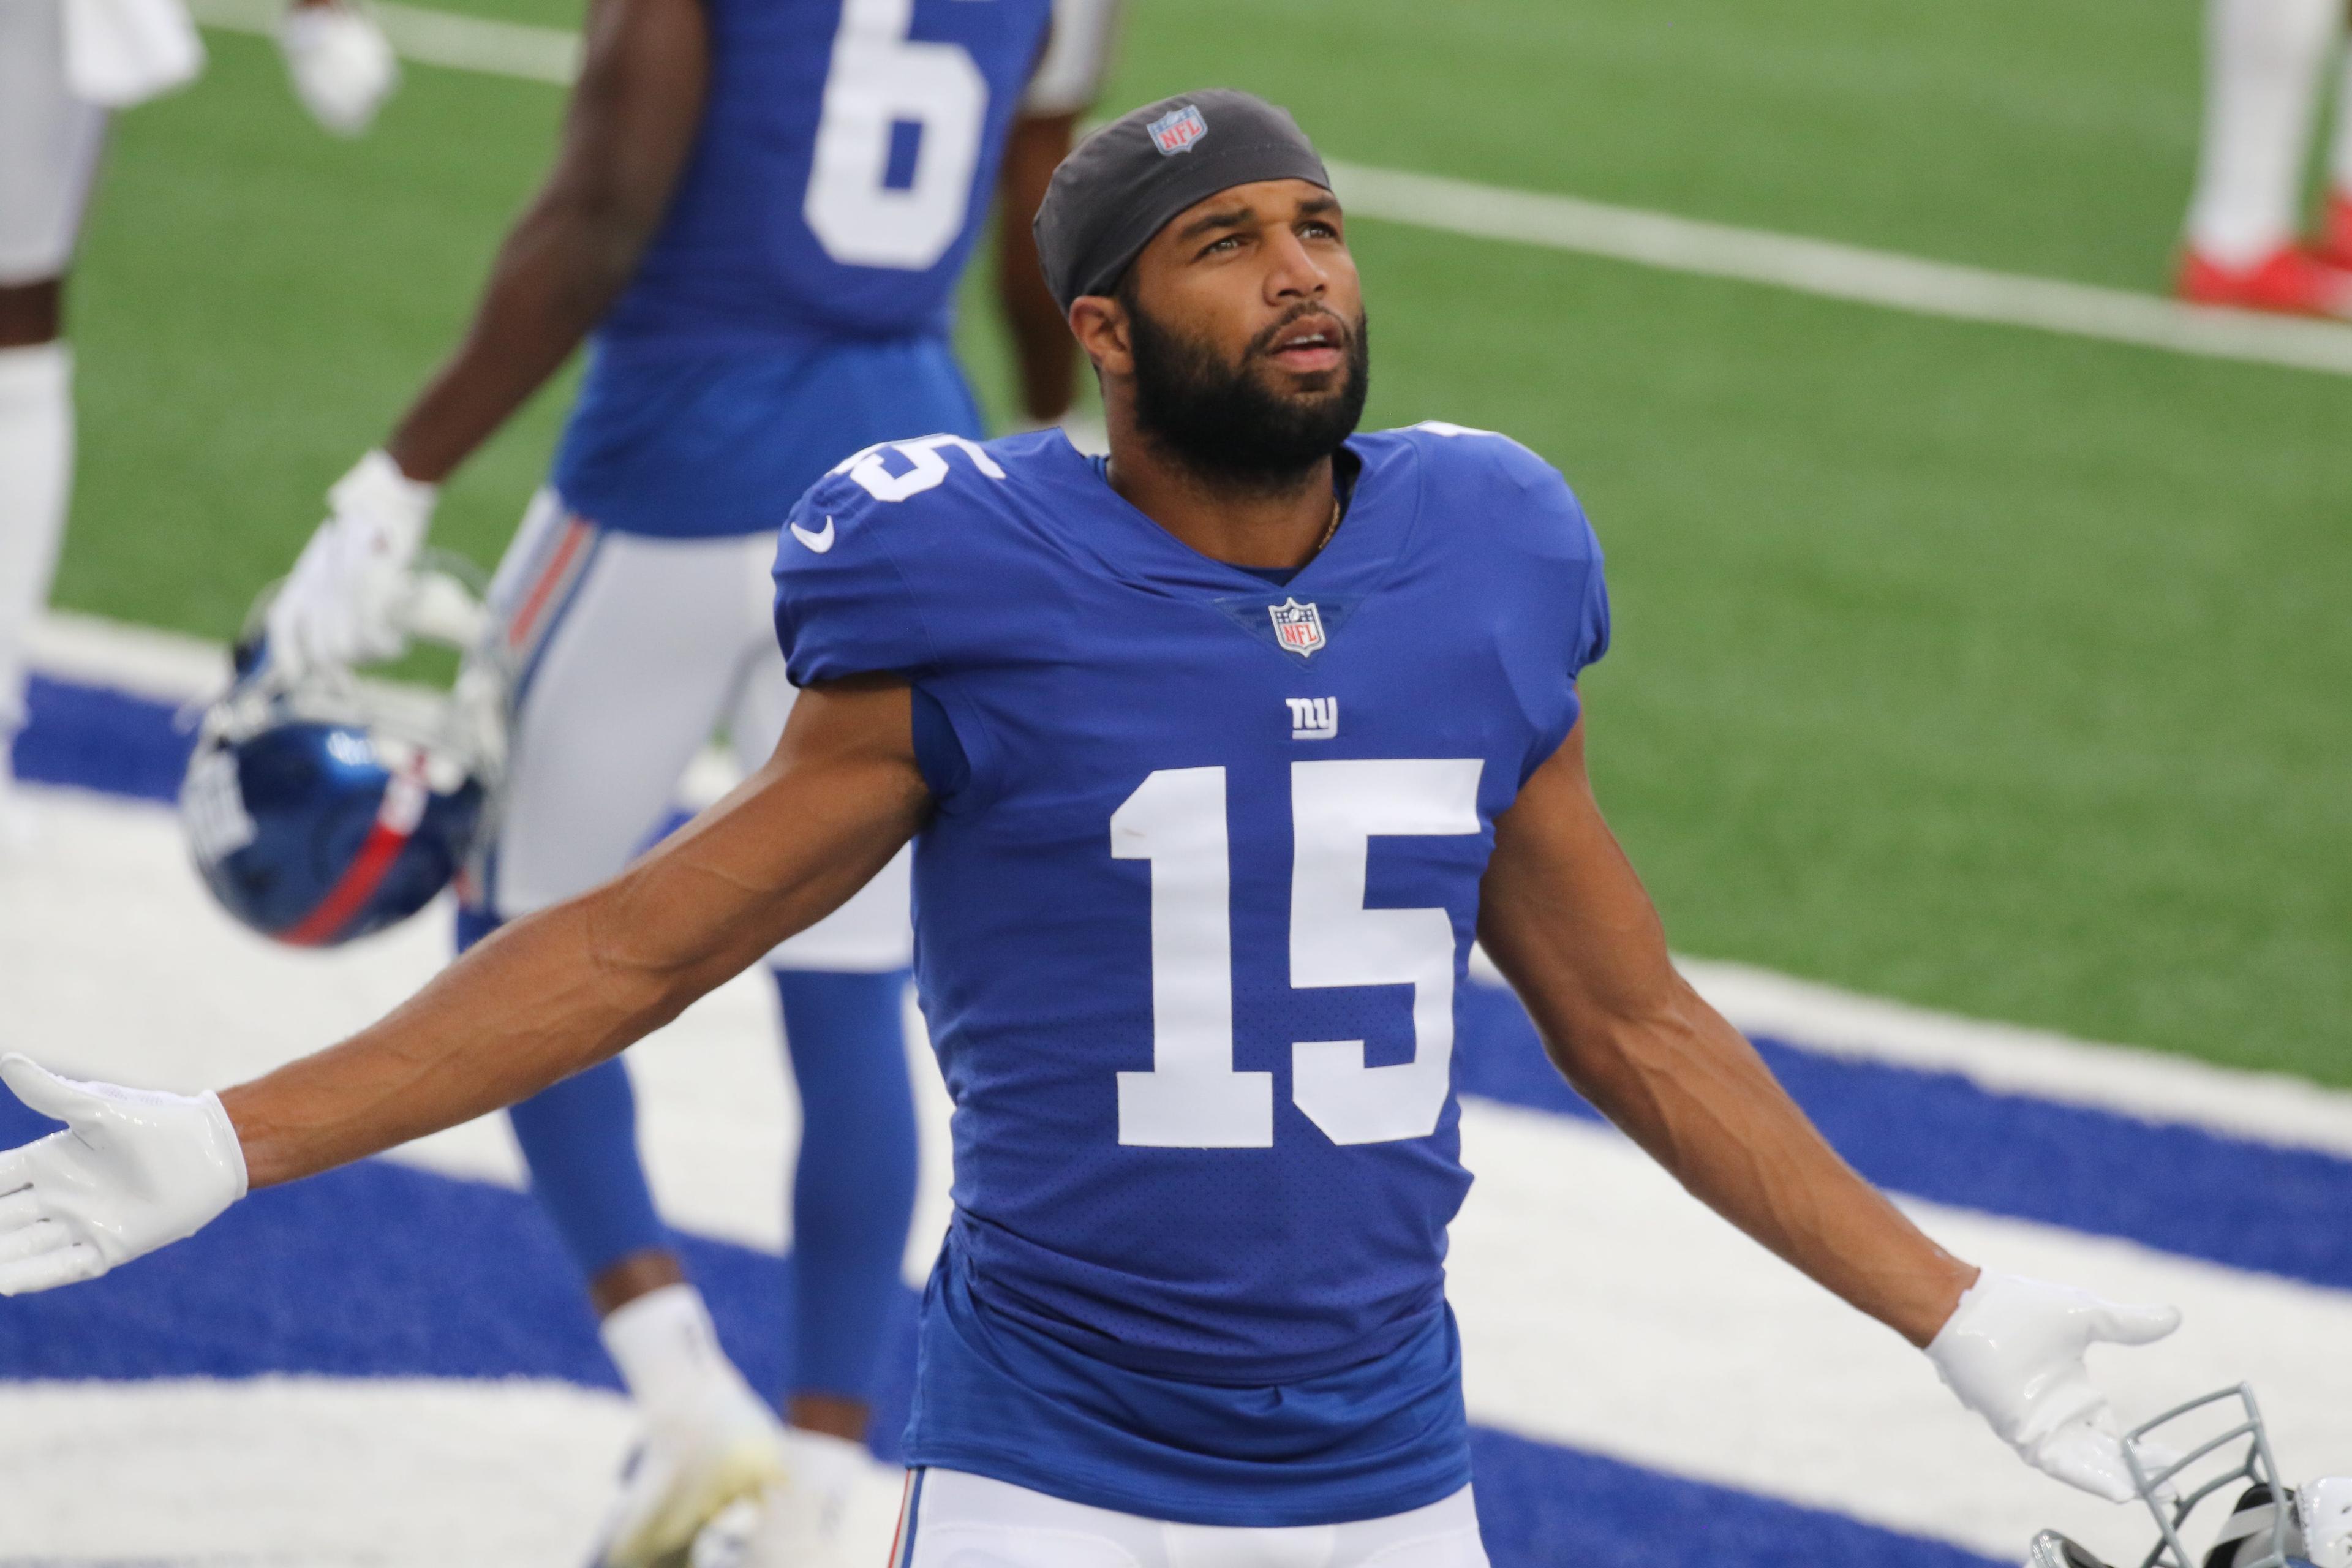 Golden Tate III dances to the music before the New York Giants play an inter-sqaud game, the Blue White scrimmage at MetLife Stadium on August 28 2020. The New York Giants Play An Inter Sqaud Game The Blue White Scrimmage At Metlife Stadium On August 28 2020 / Chris Pedota, NorthJersey.com via Imagn Content Services, LLC